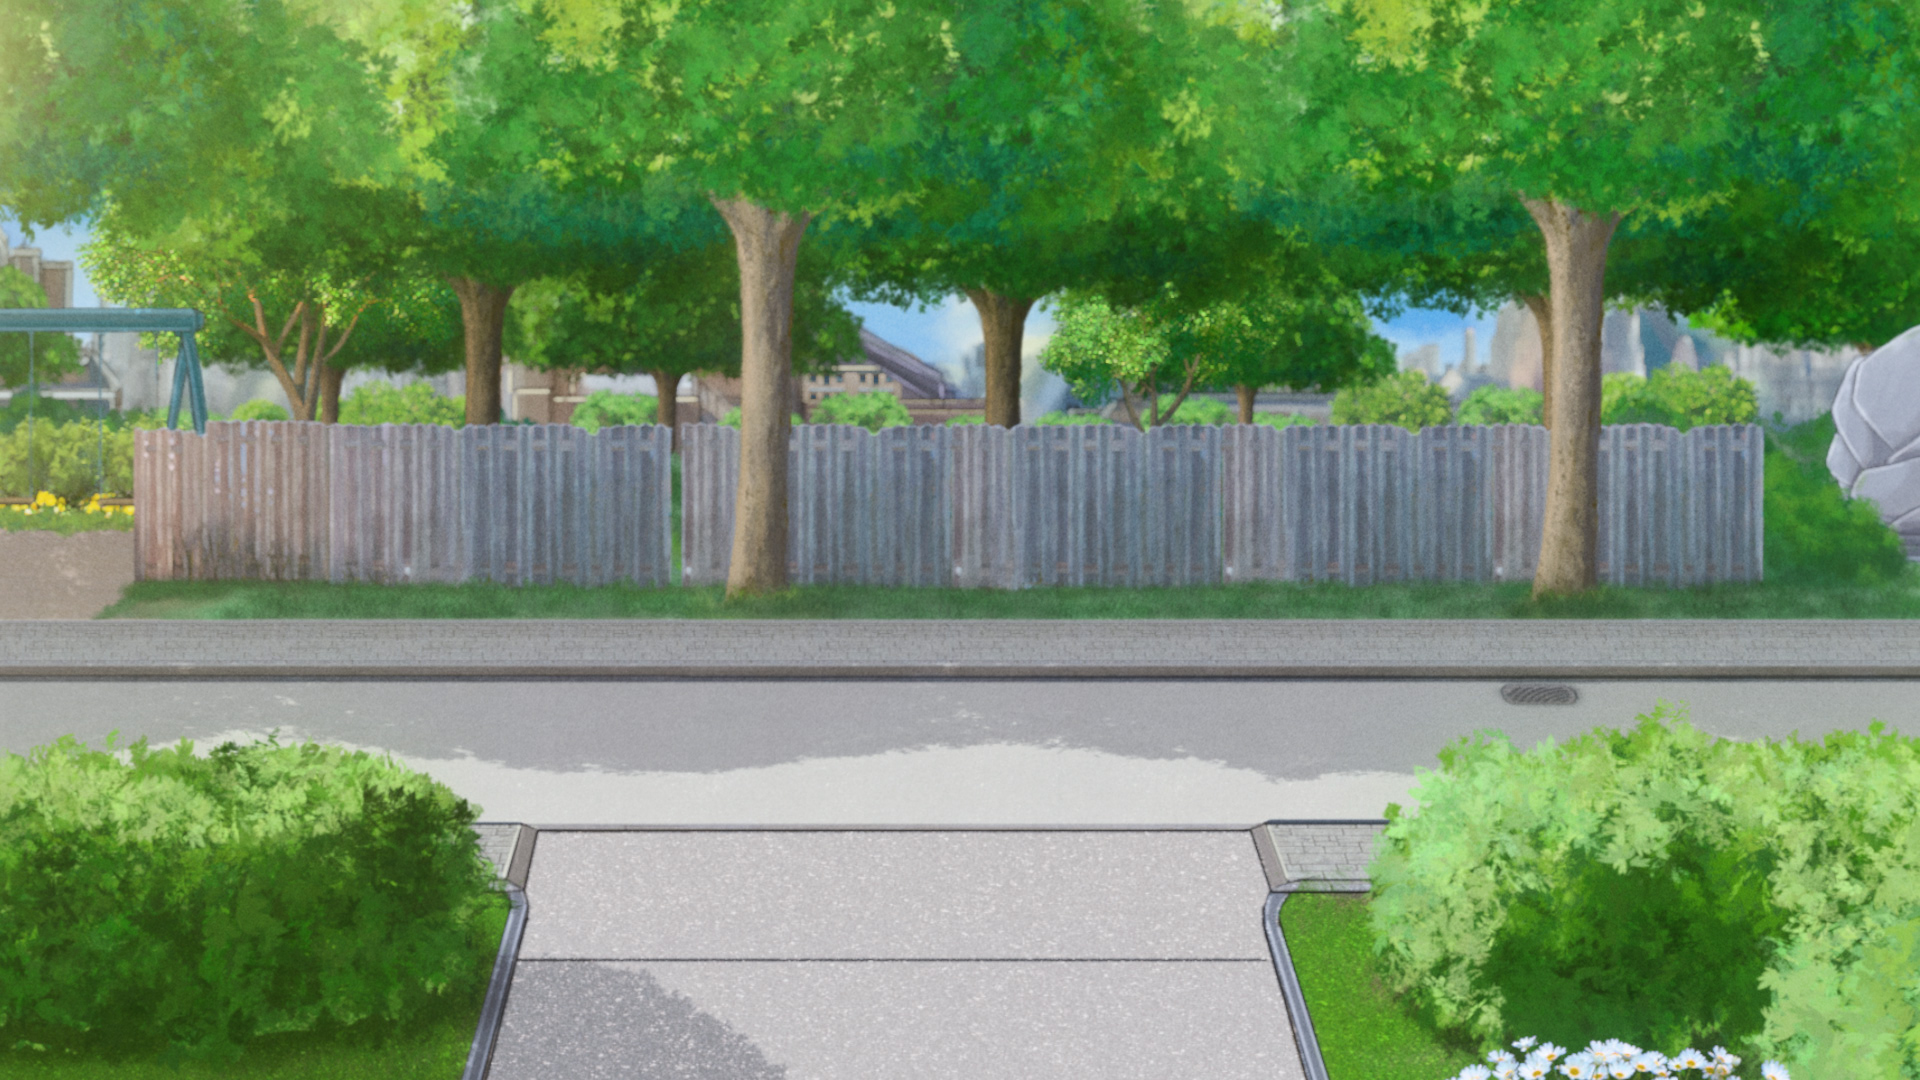 Outdoors Digital Art Nature Anime Grass Plants Trees Road Swings Outskirts 1920x1080